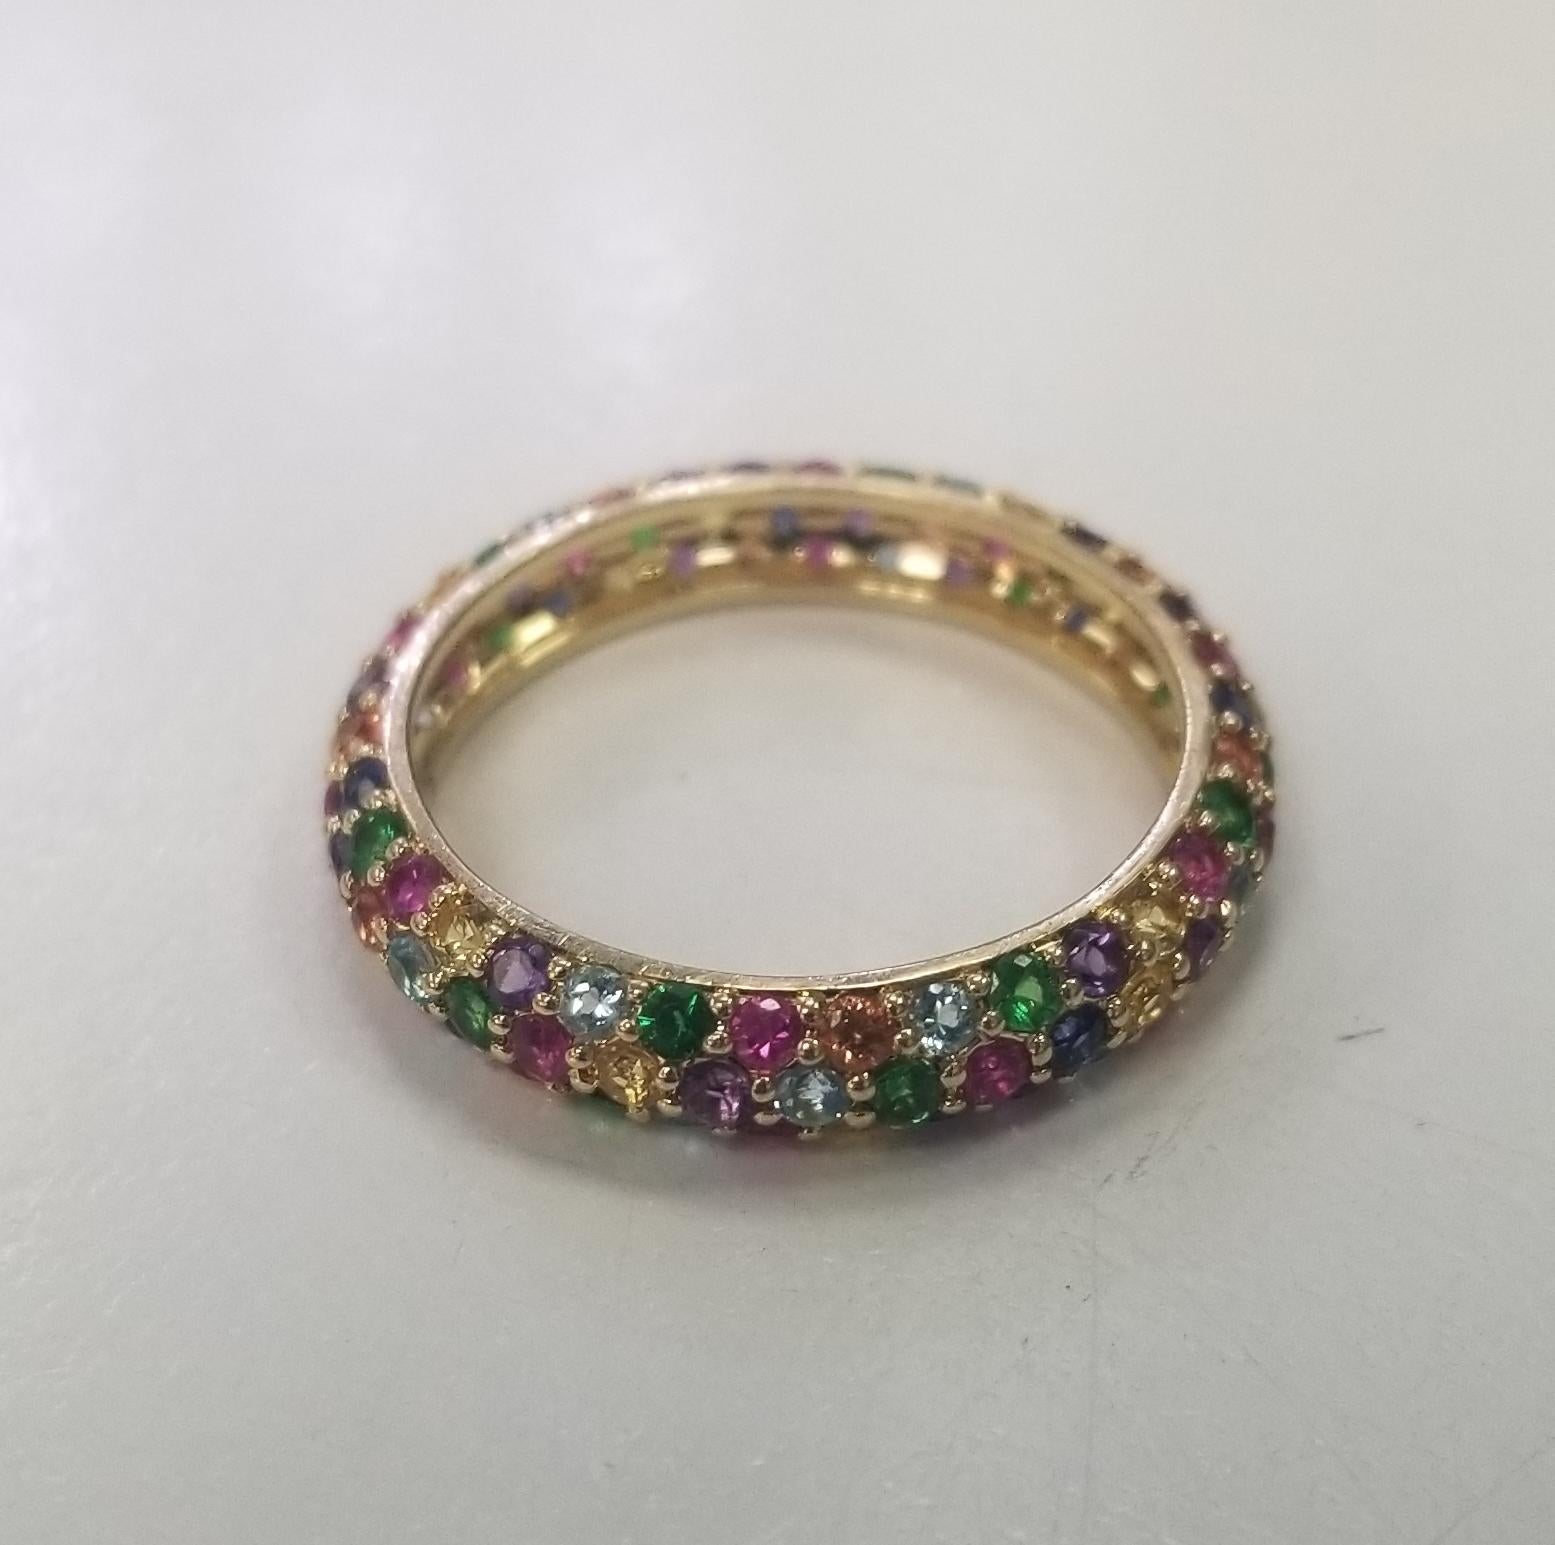 Specifications:
    main stone: round cut Multi colored Gem stones 104 PCS
    carat total weight: APPROX. 2.50 CARAT TOTAL WEIGHT 
    brand: NONE
    metal: 14K GOLD
    type: ETERNITY ring
    weight: 3.0 GrS
    size: 9 US


